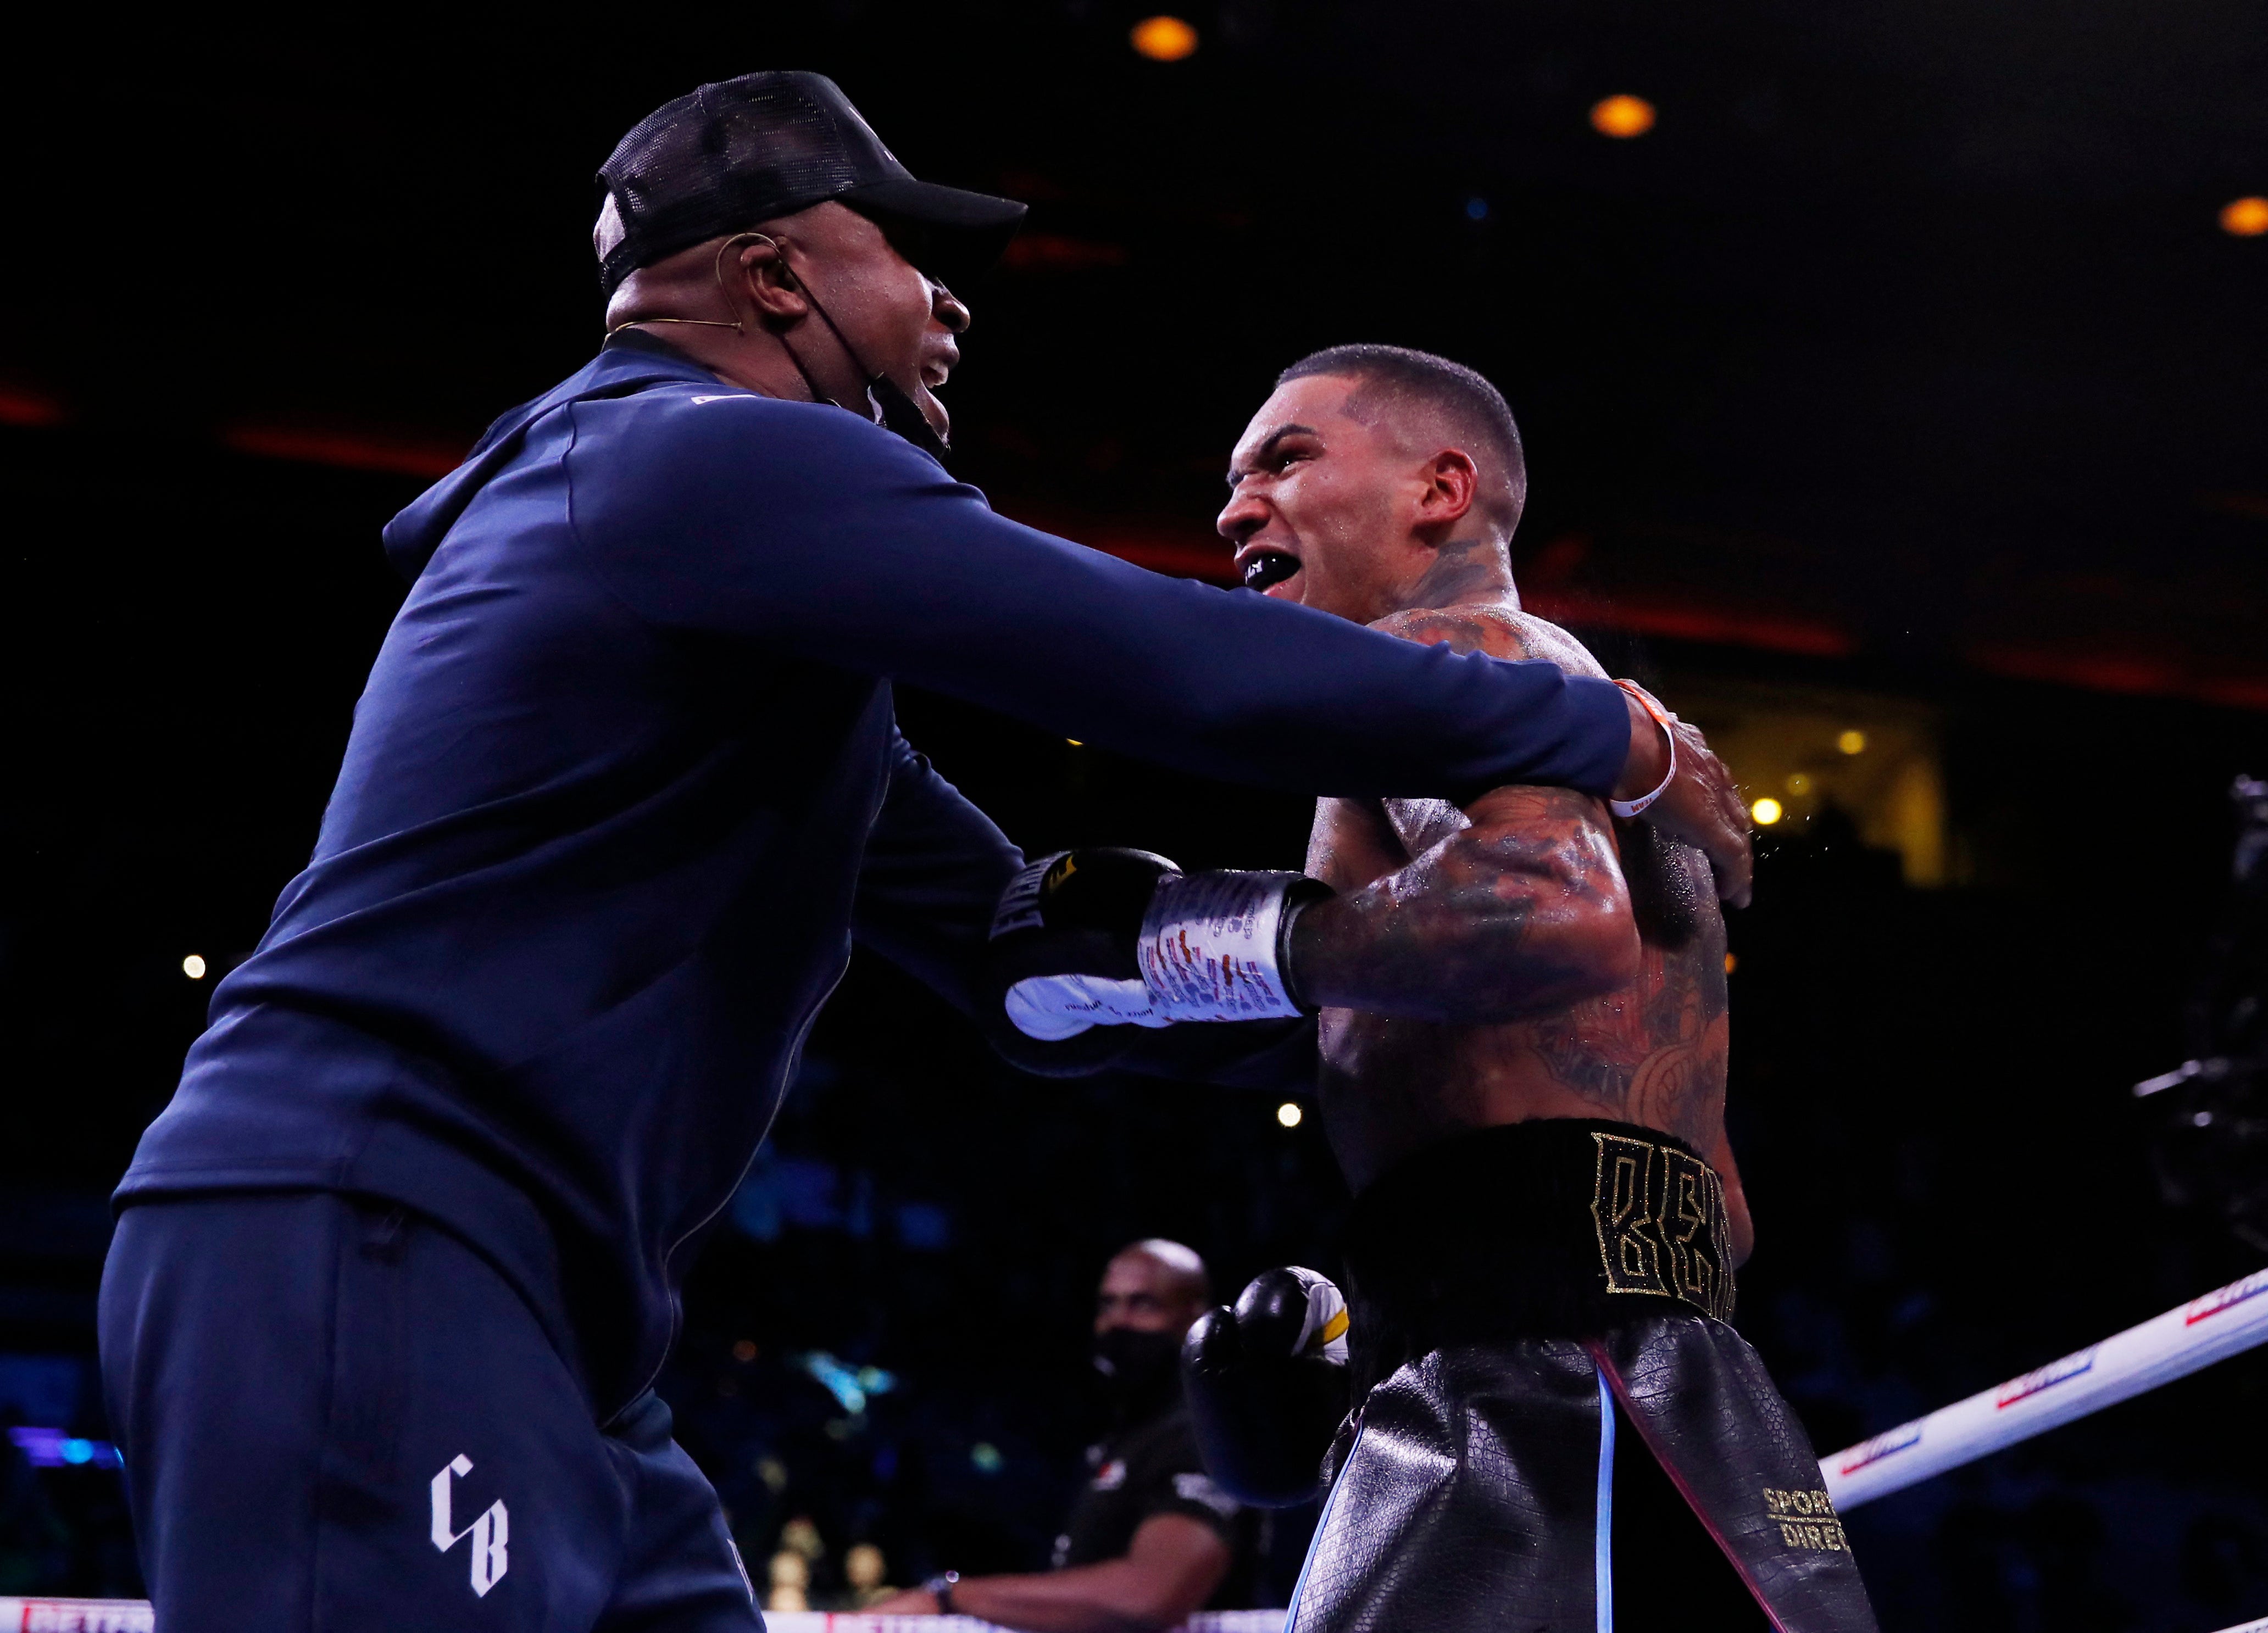 Conor Benn (right) is embraced by father and boxing icon Nigel Benn